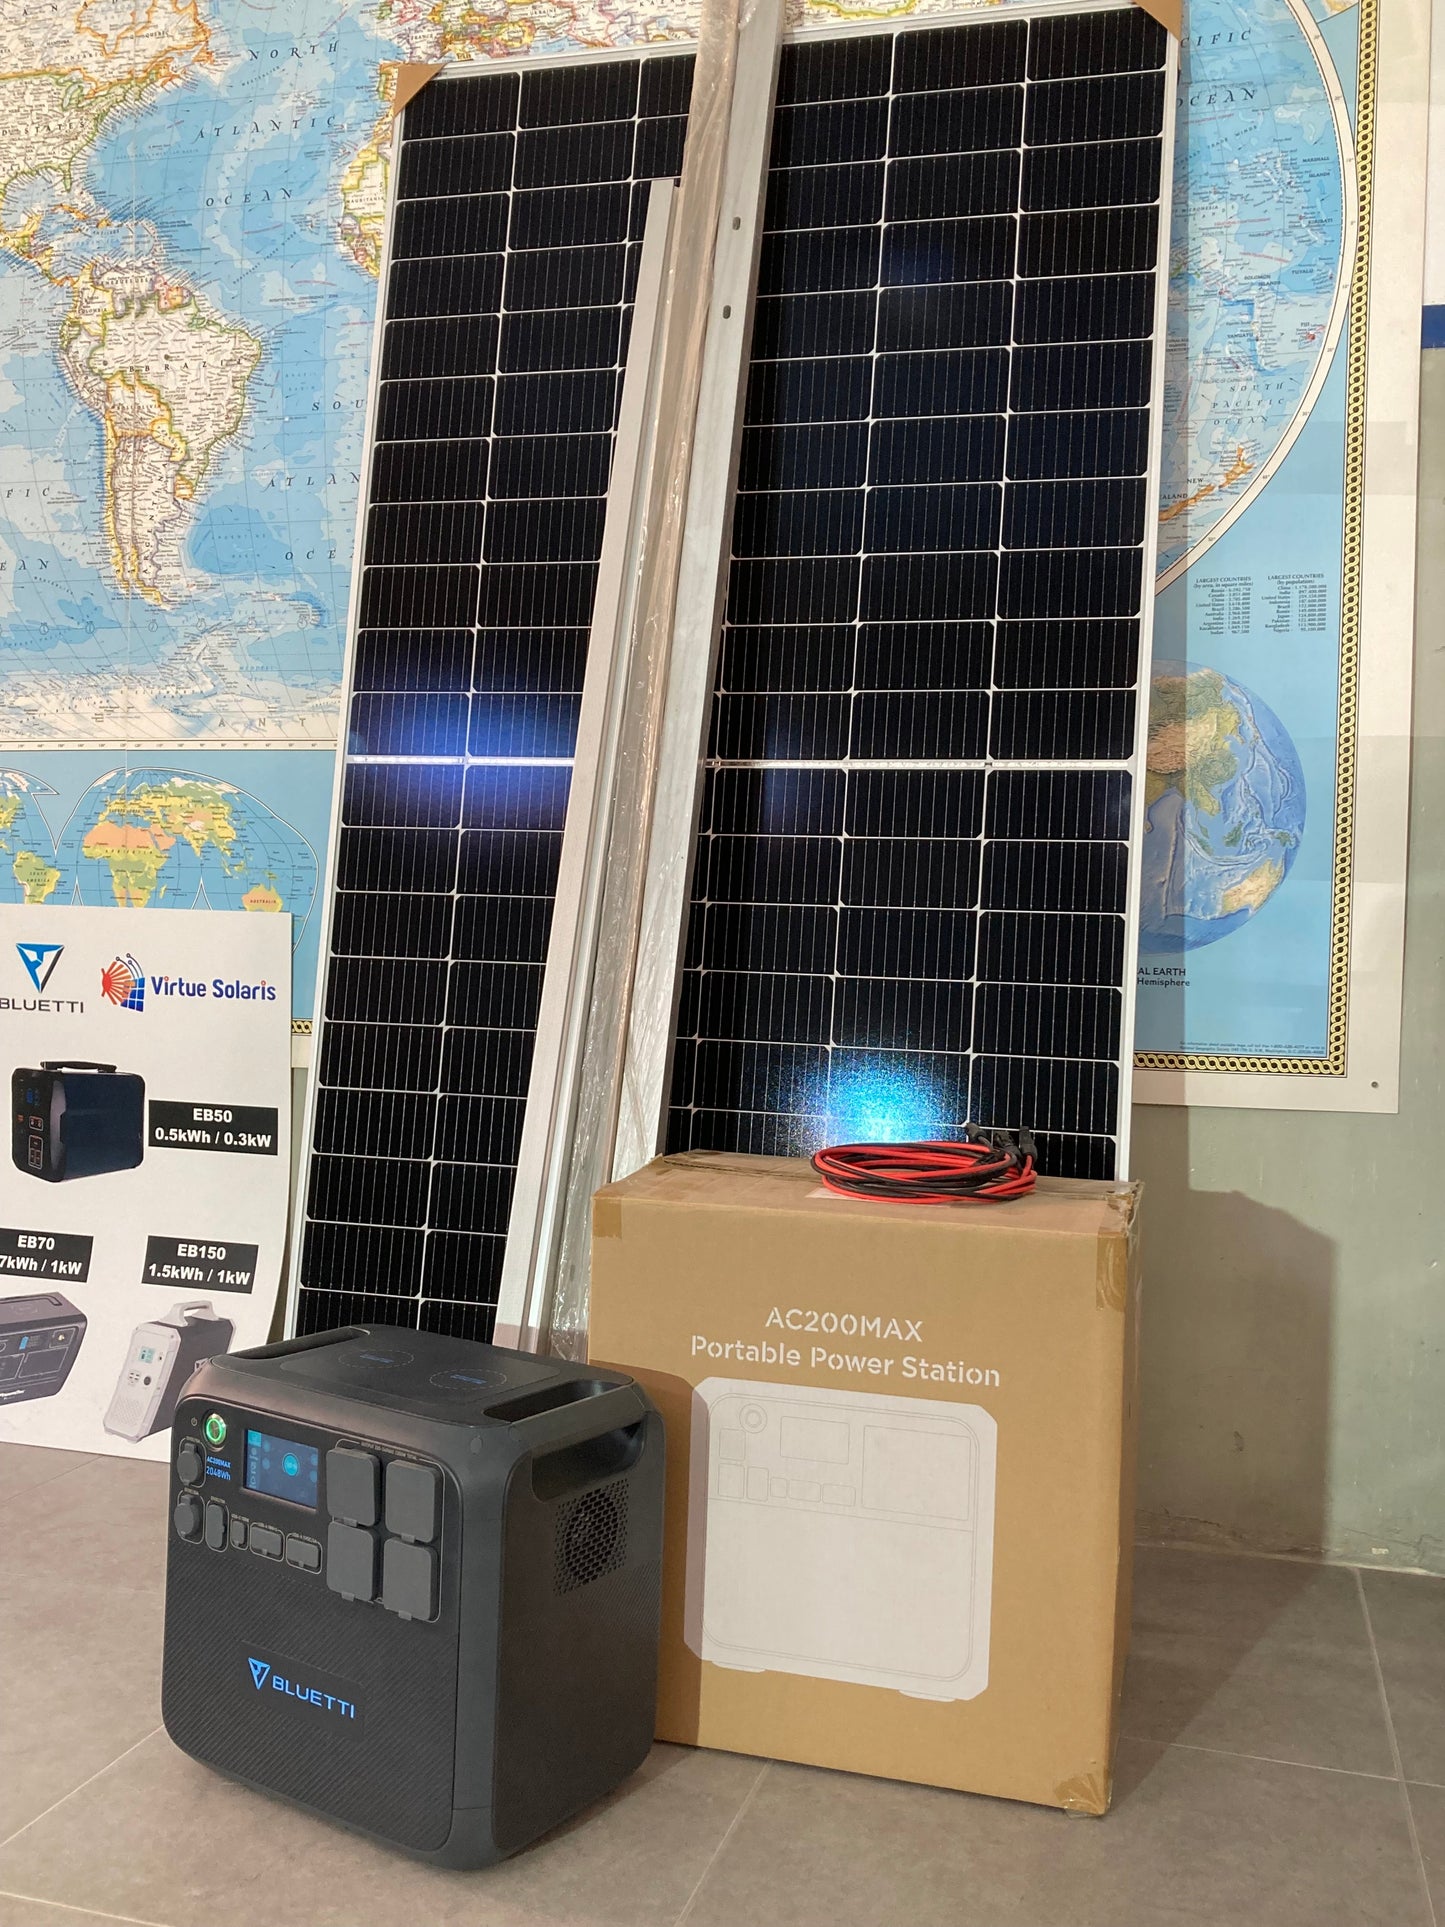 Off-grid kit: Bluetti AC200 MAX solar generator + 385Wp solar panel, mounting and cable accessories